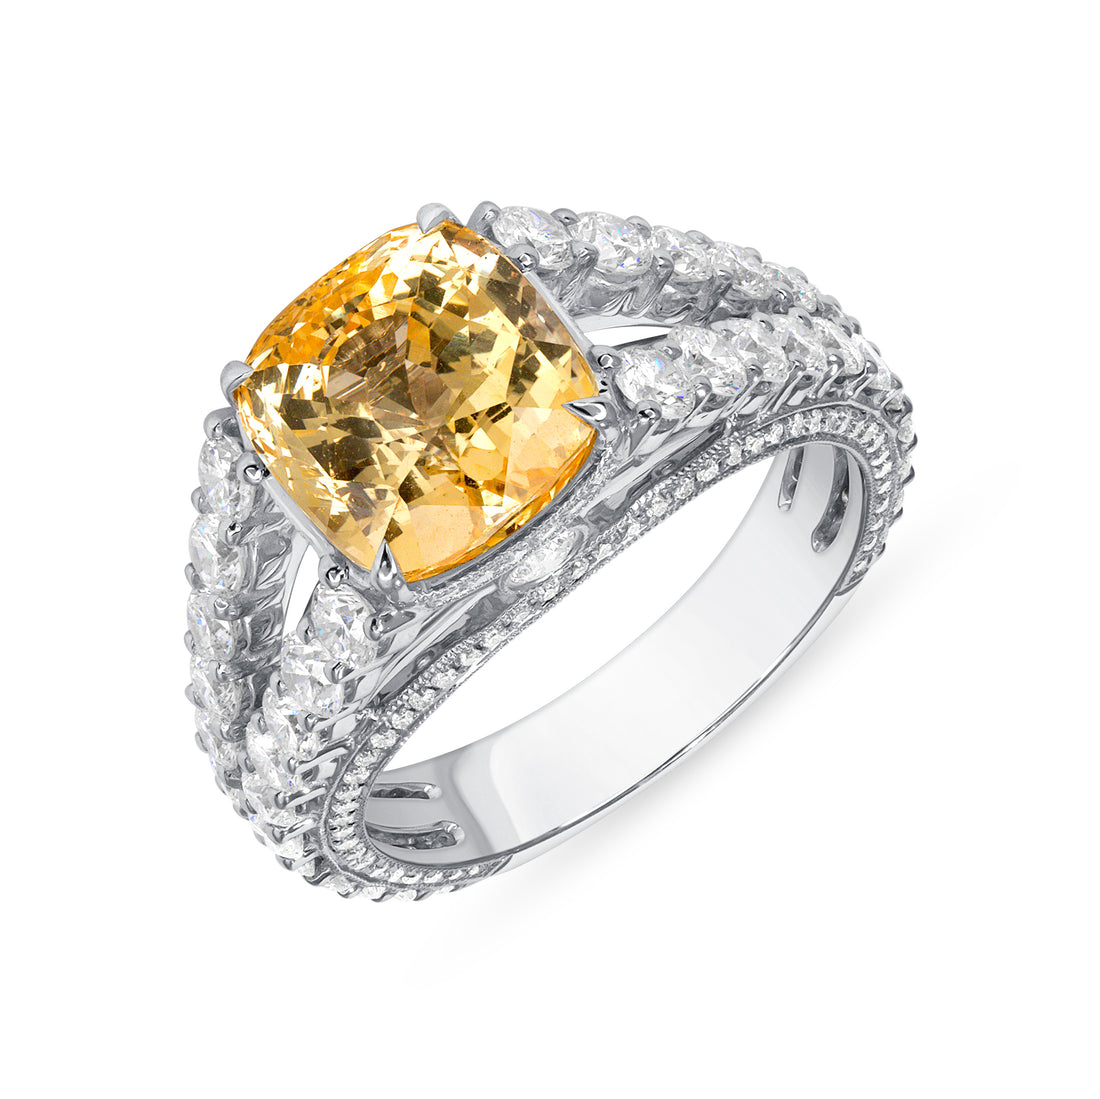 6.39 CT Cushion Cut Yellow Sapphire and Round Brilliant Diamond Ring in 18K White Gold